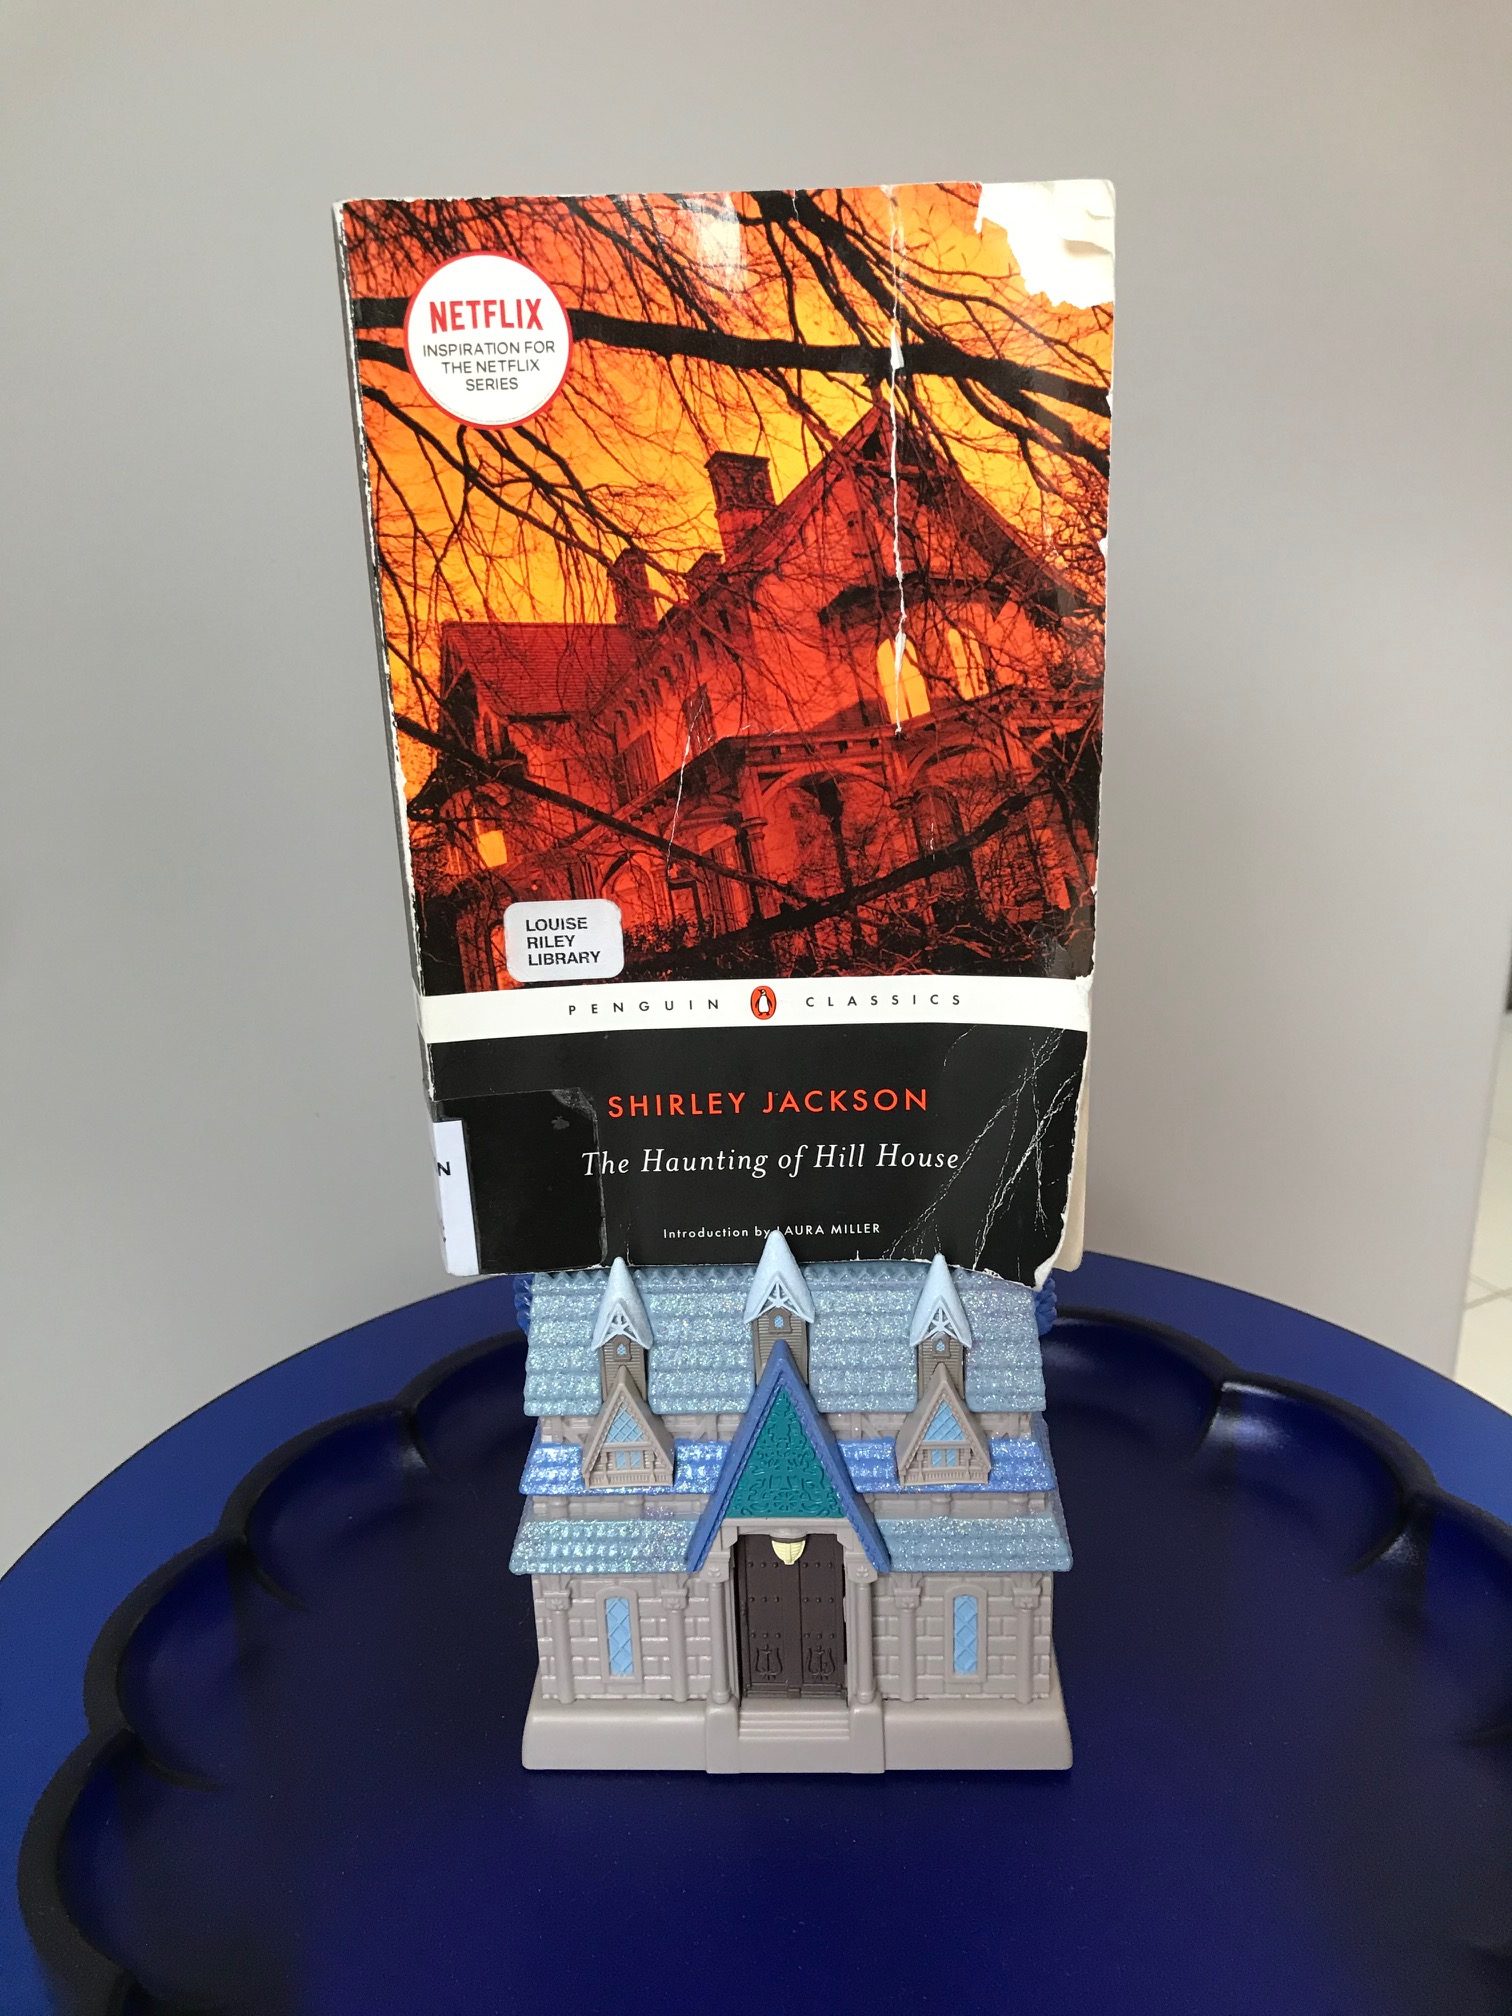 The Haunting of Hill House by Shirley Jackson book